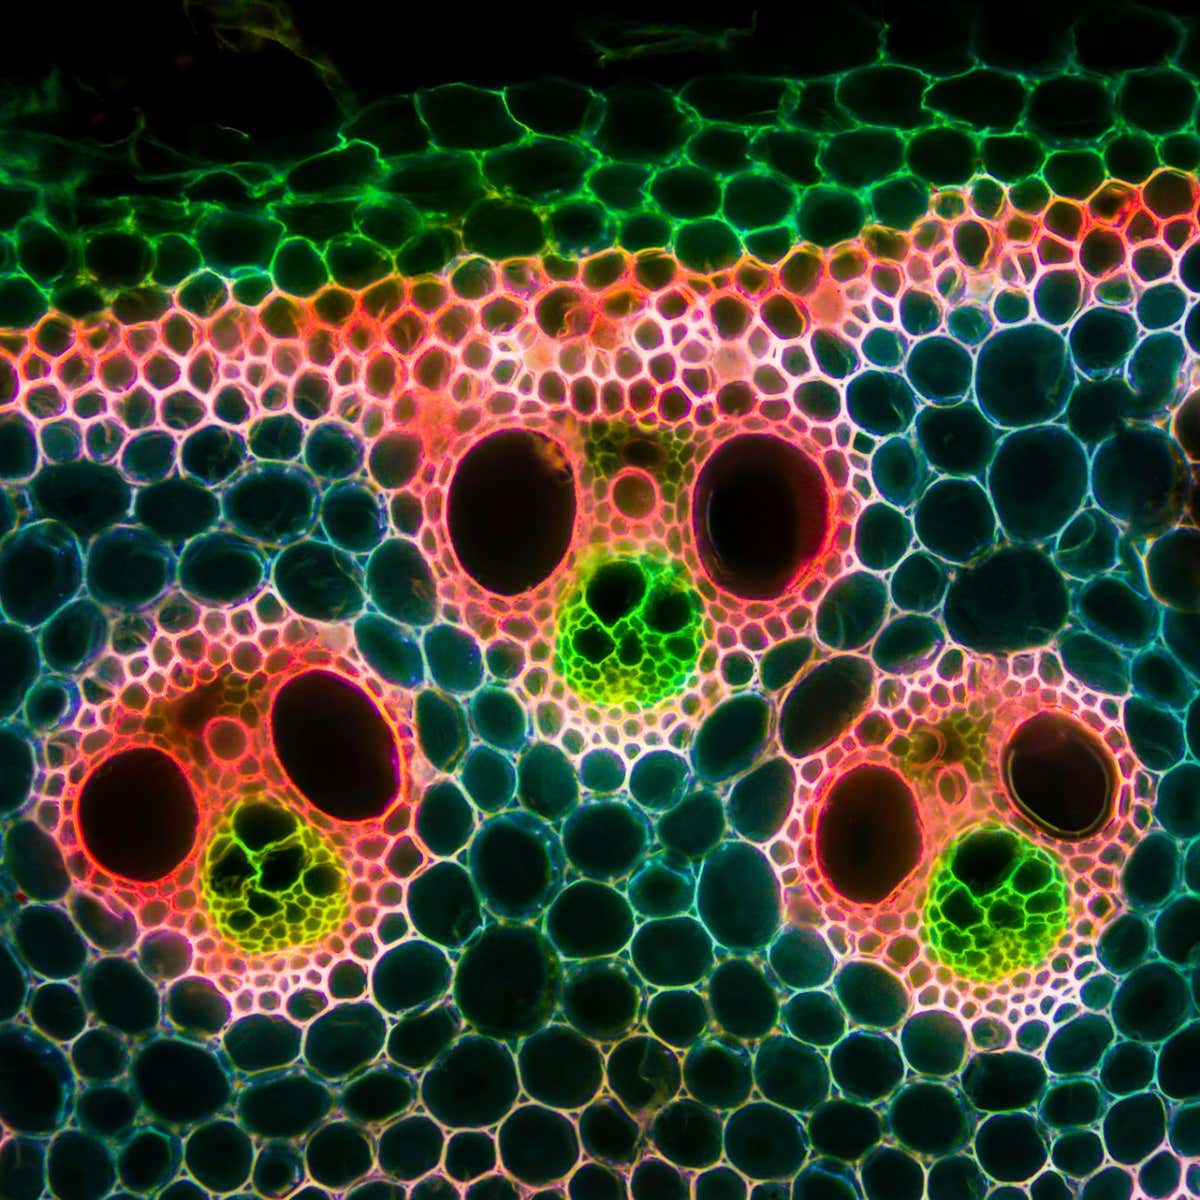 Plant microverse. cross-section through the rhizome of Phragmites. In this picture, you can see typical vascular bundles of grasses resembling faces. The ?eyes?are actually vessels of the xylem. This part of the vascular bundle is made from dead cells with thick cell walls, forming hollow ?pipes? responsible for the transport of water and minerals through the plant. The green part of the bundle is the phloem, made of living, responsible for the transport of sugars made in the process of photosynthesis. Autofluorescence in UV excitation light.